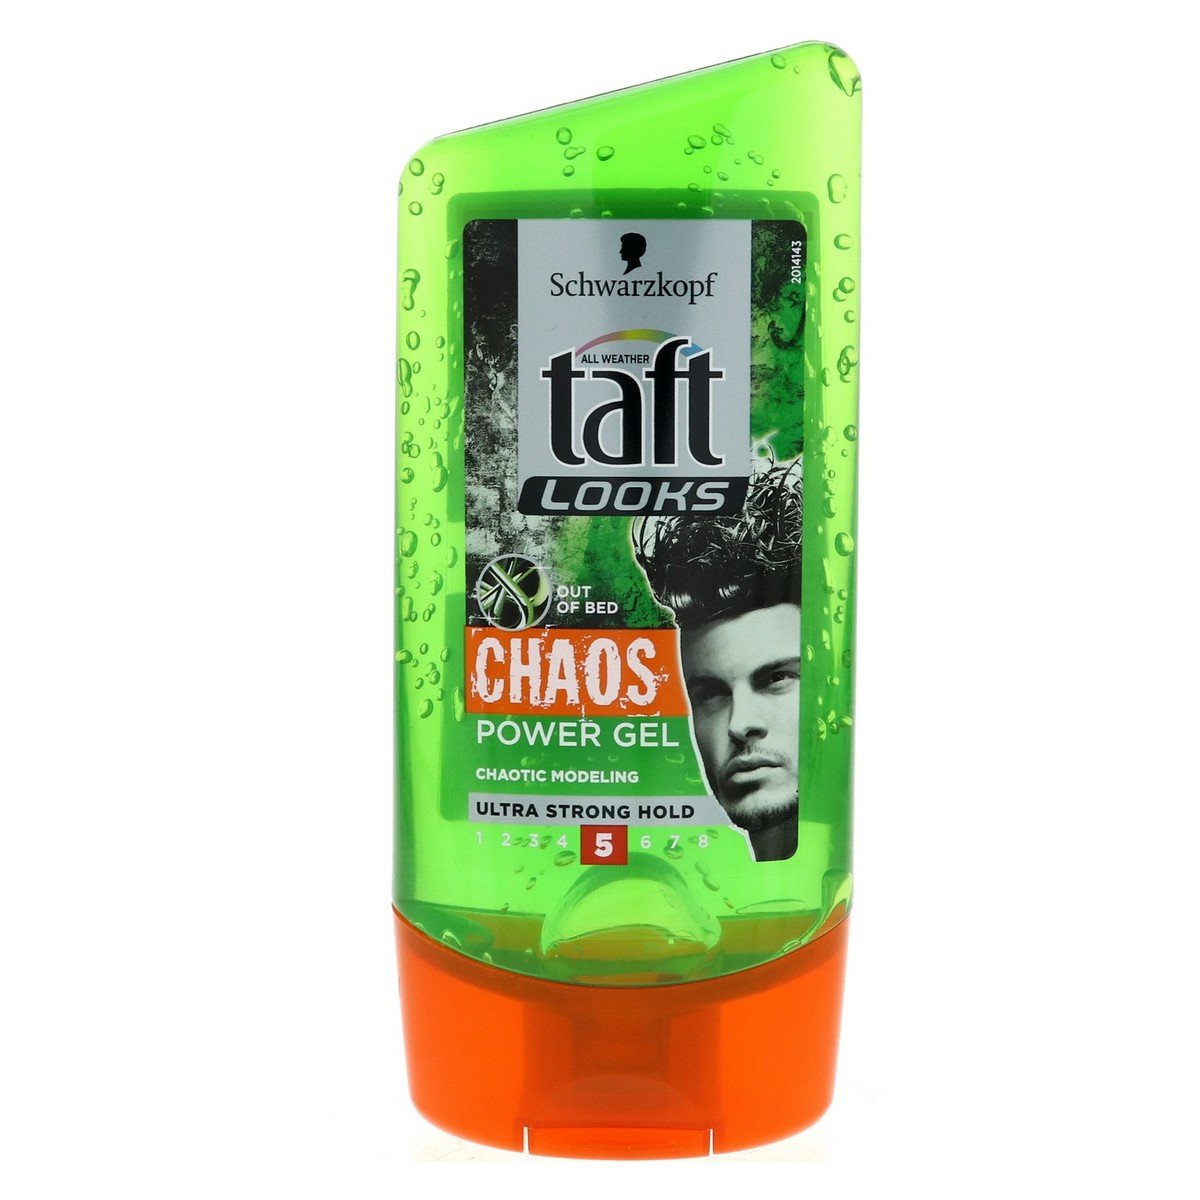 Taft Looks Out Of Bed Chaos Power Gel 150ml